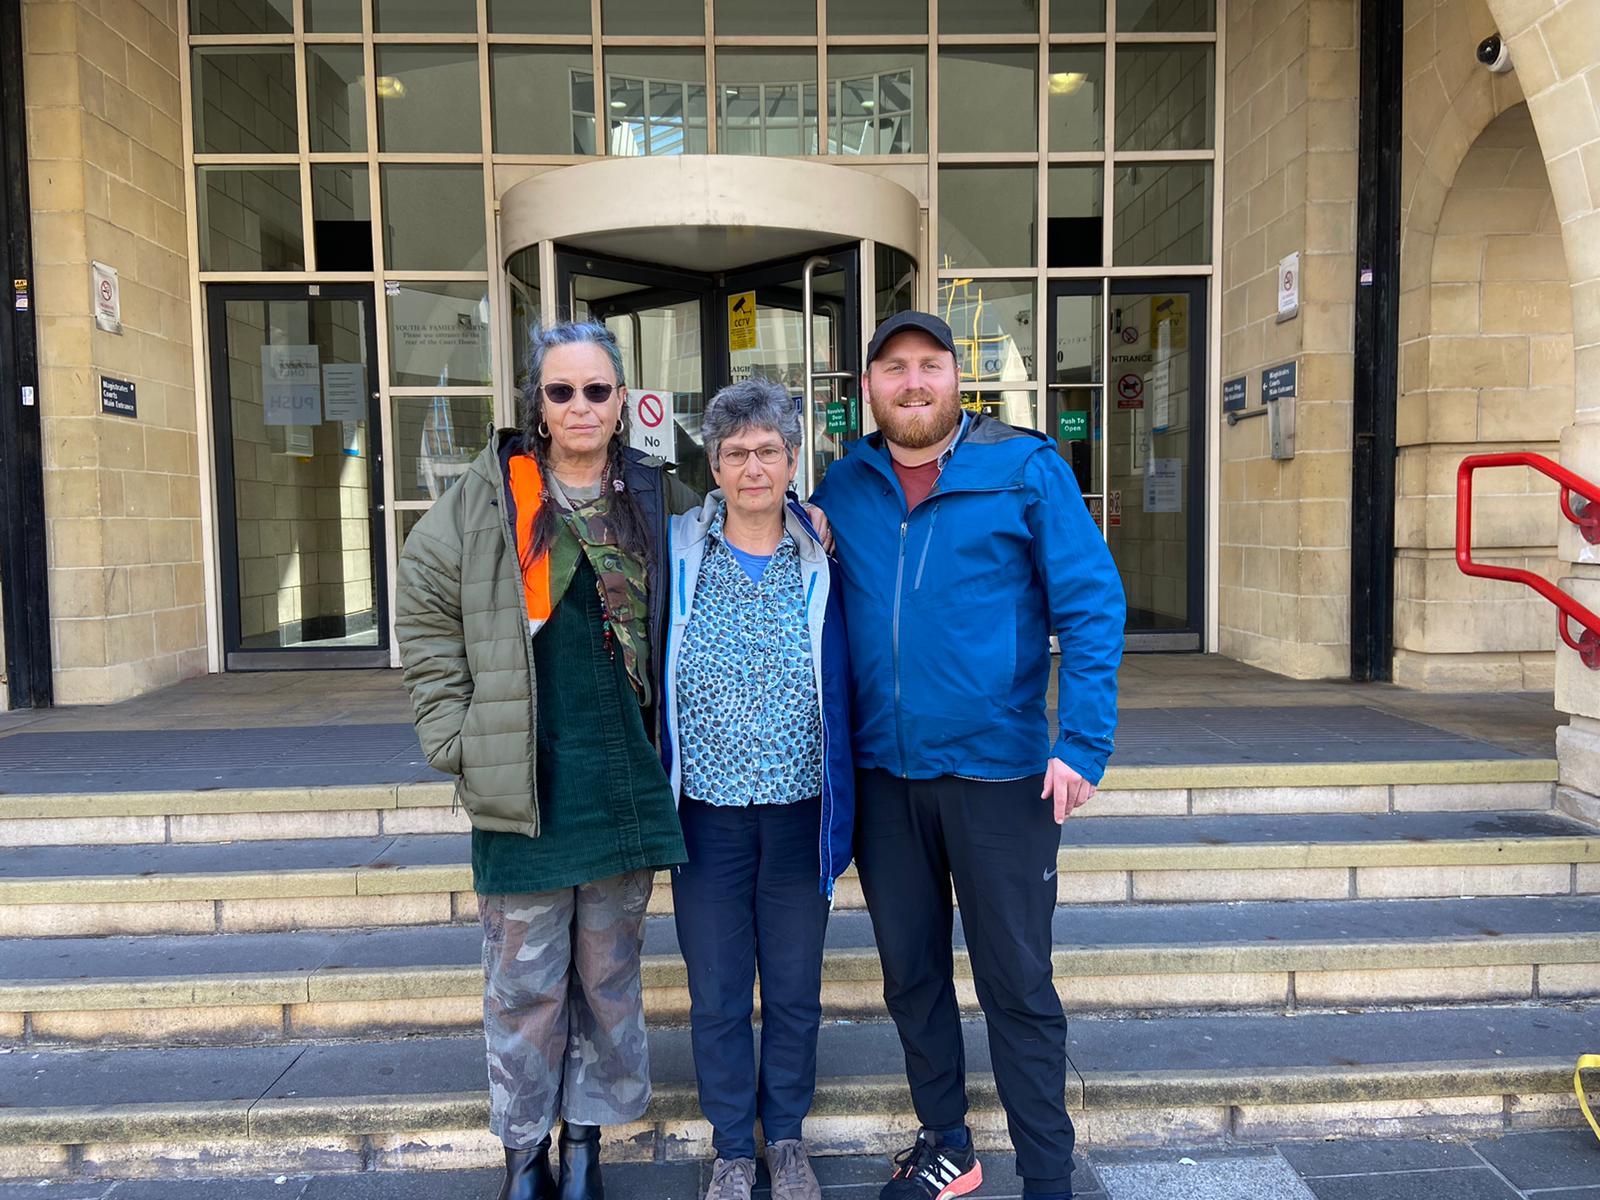 Ana Heyatawin, Diana Warner and Liam Norton, the three Insulate Britain activists who disrupted the court proceedings Tuesday.